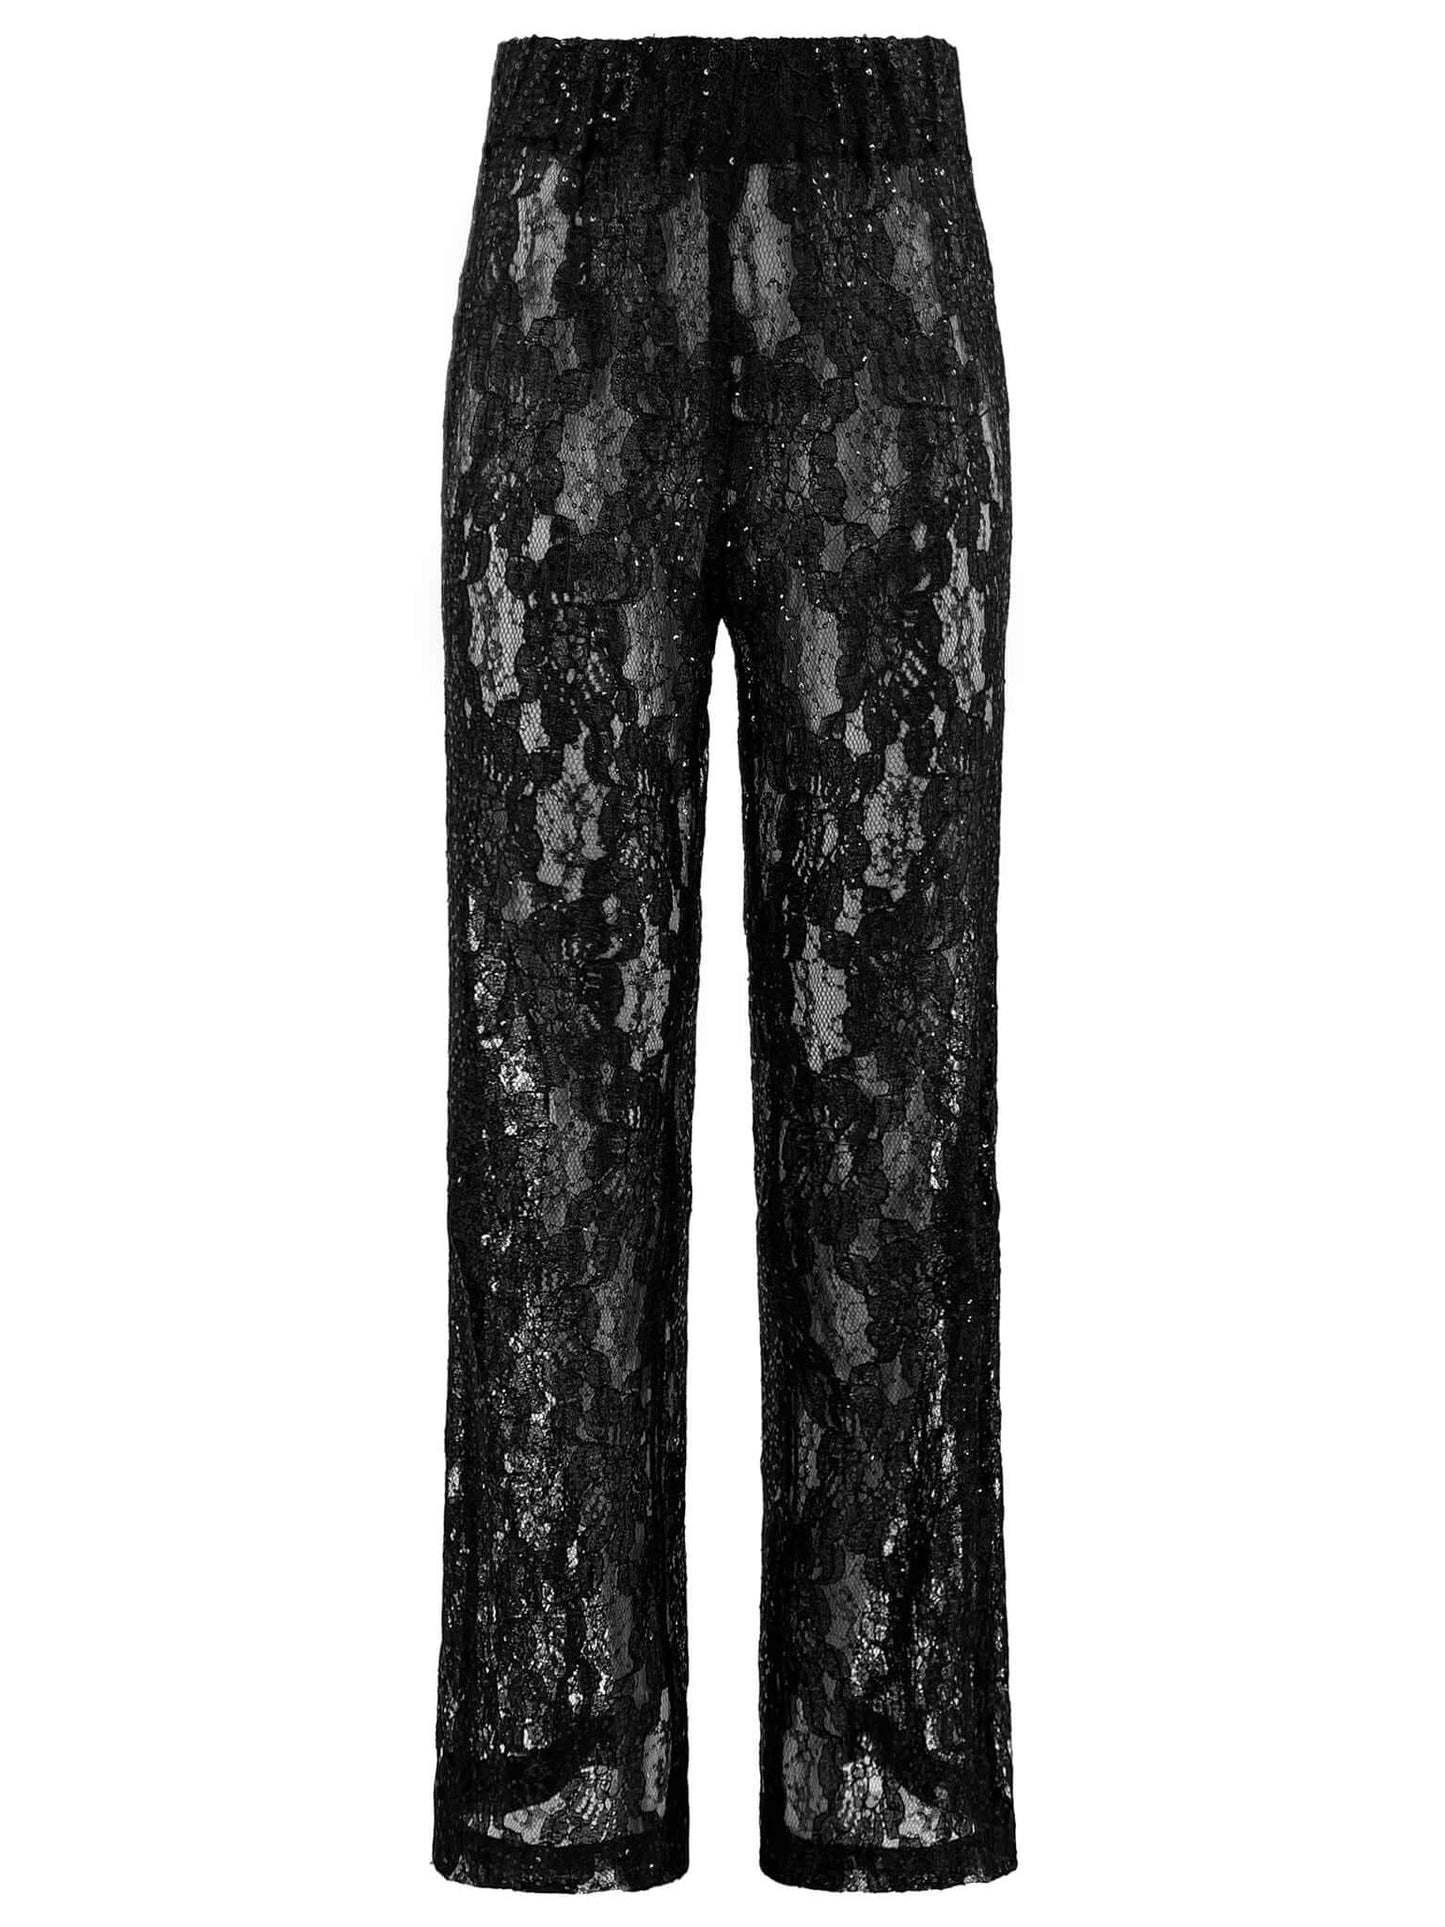 Glowing in the Dark Flared Sheer Lace Trousers by Tia Dorraine Women's Luxury Fashion Designer Clothing Brand